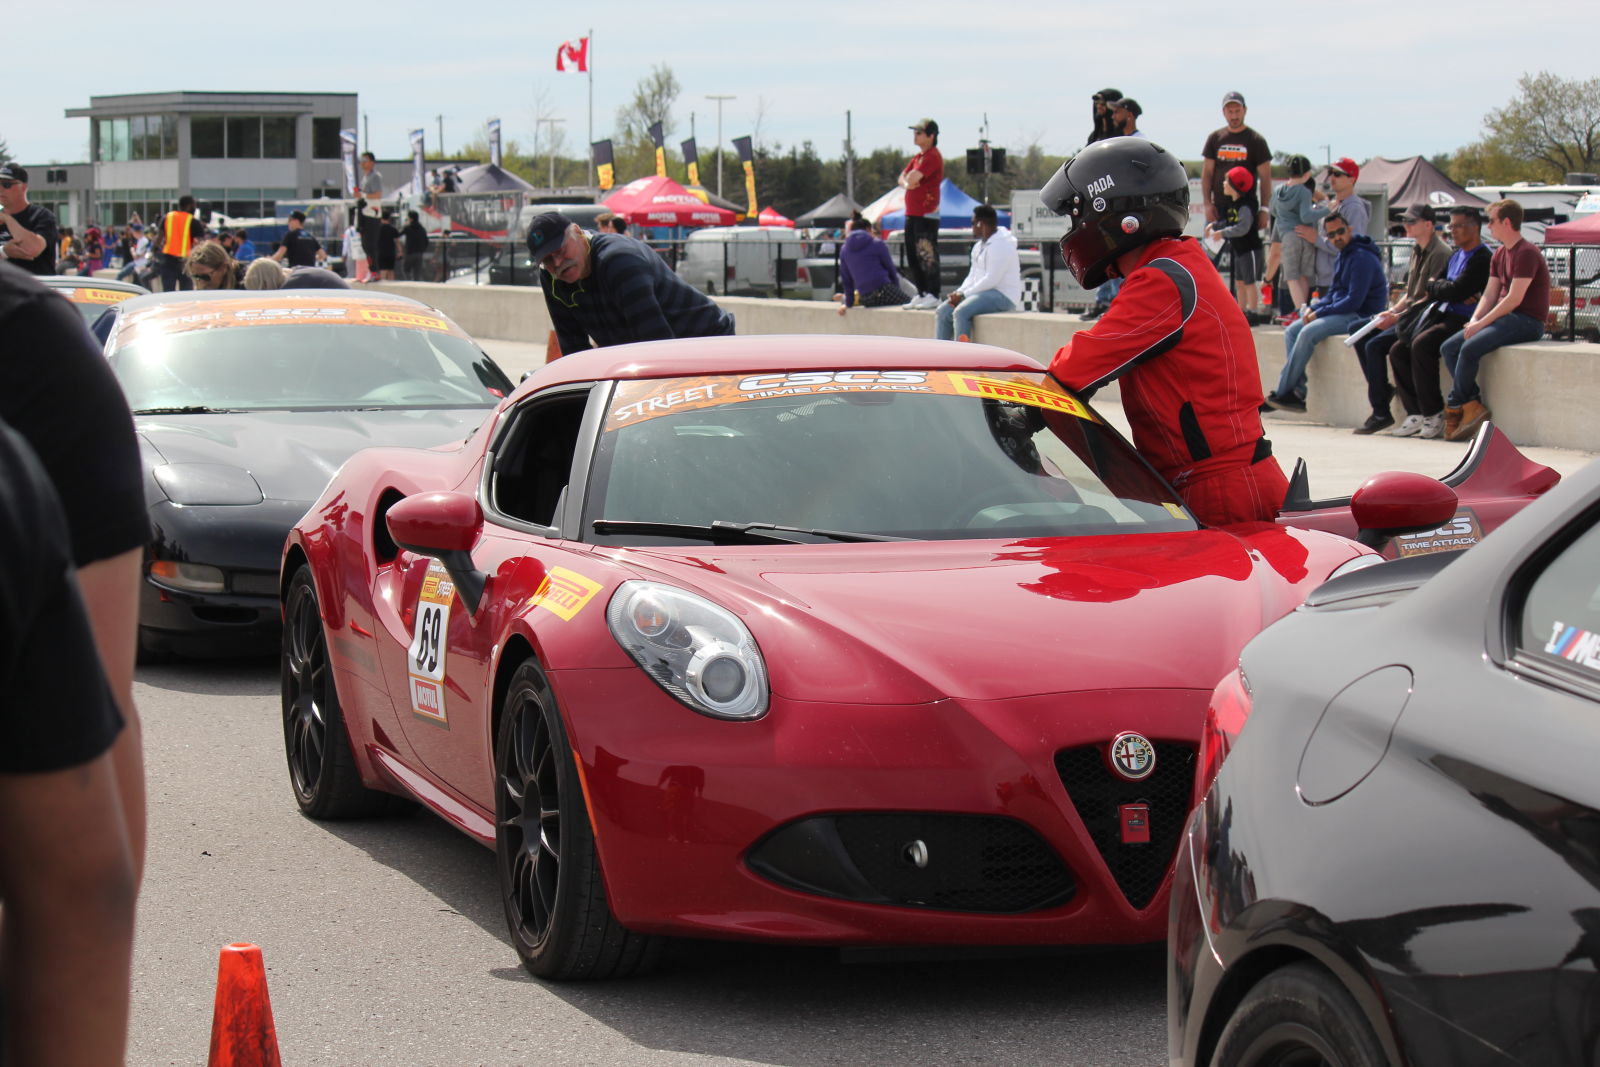 An Auto-x/Track friend of mine at local time attack series back in June &amp; his 4C.